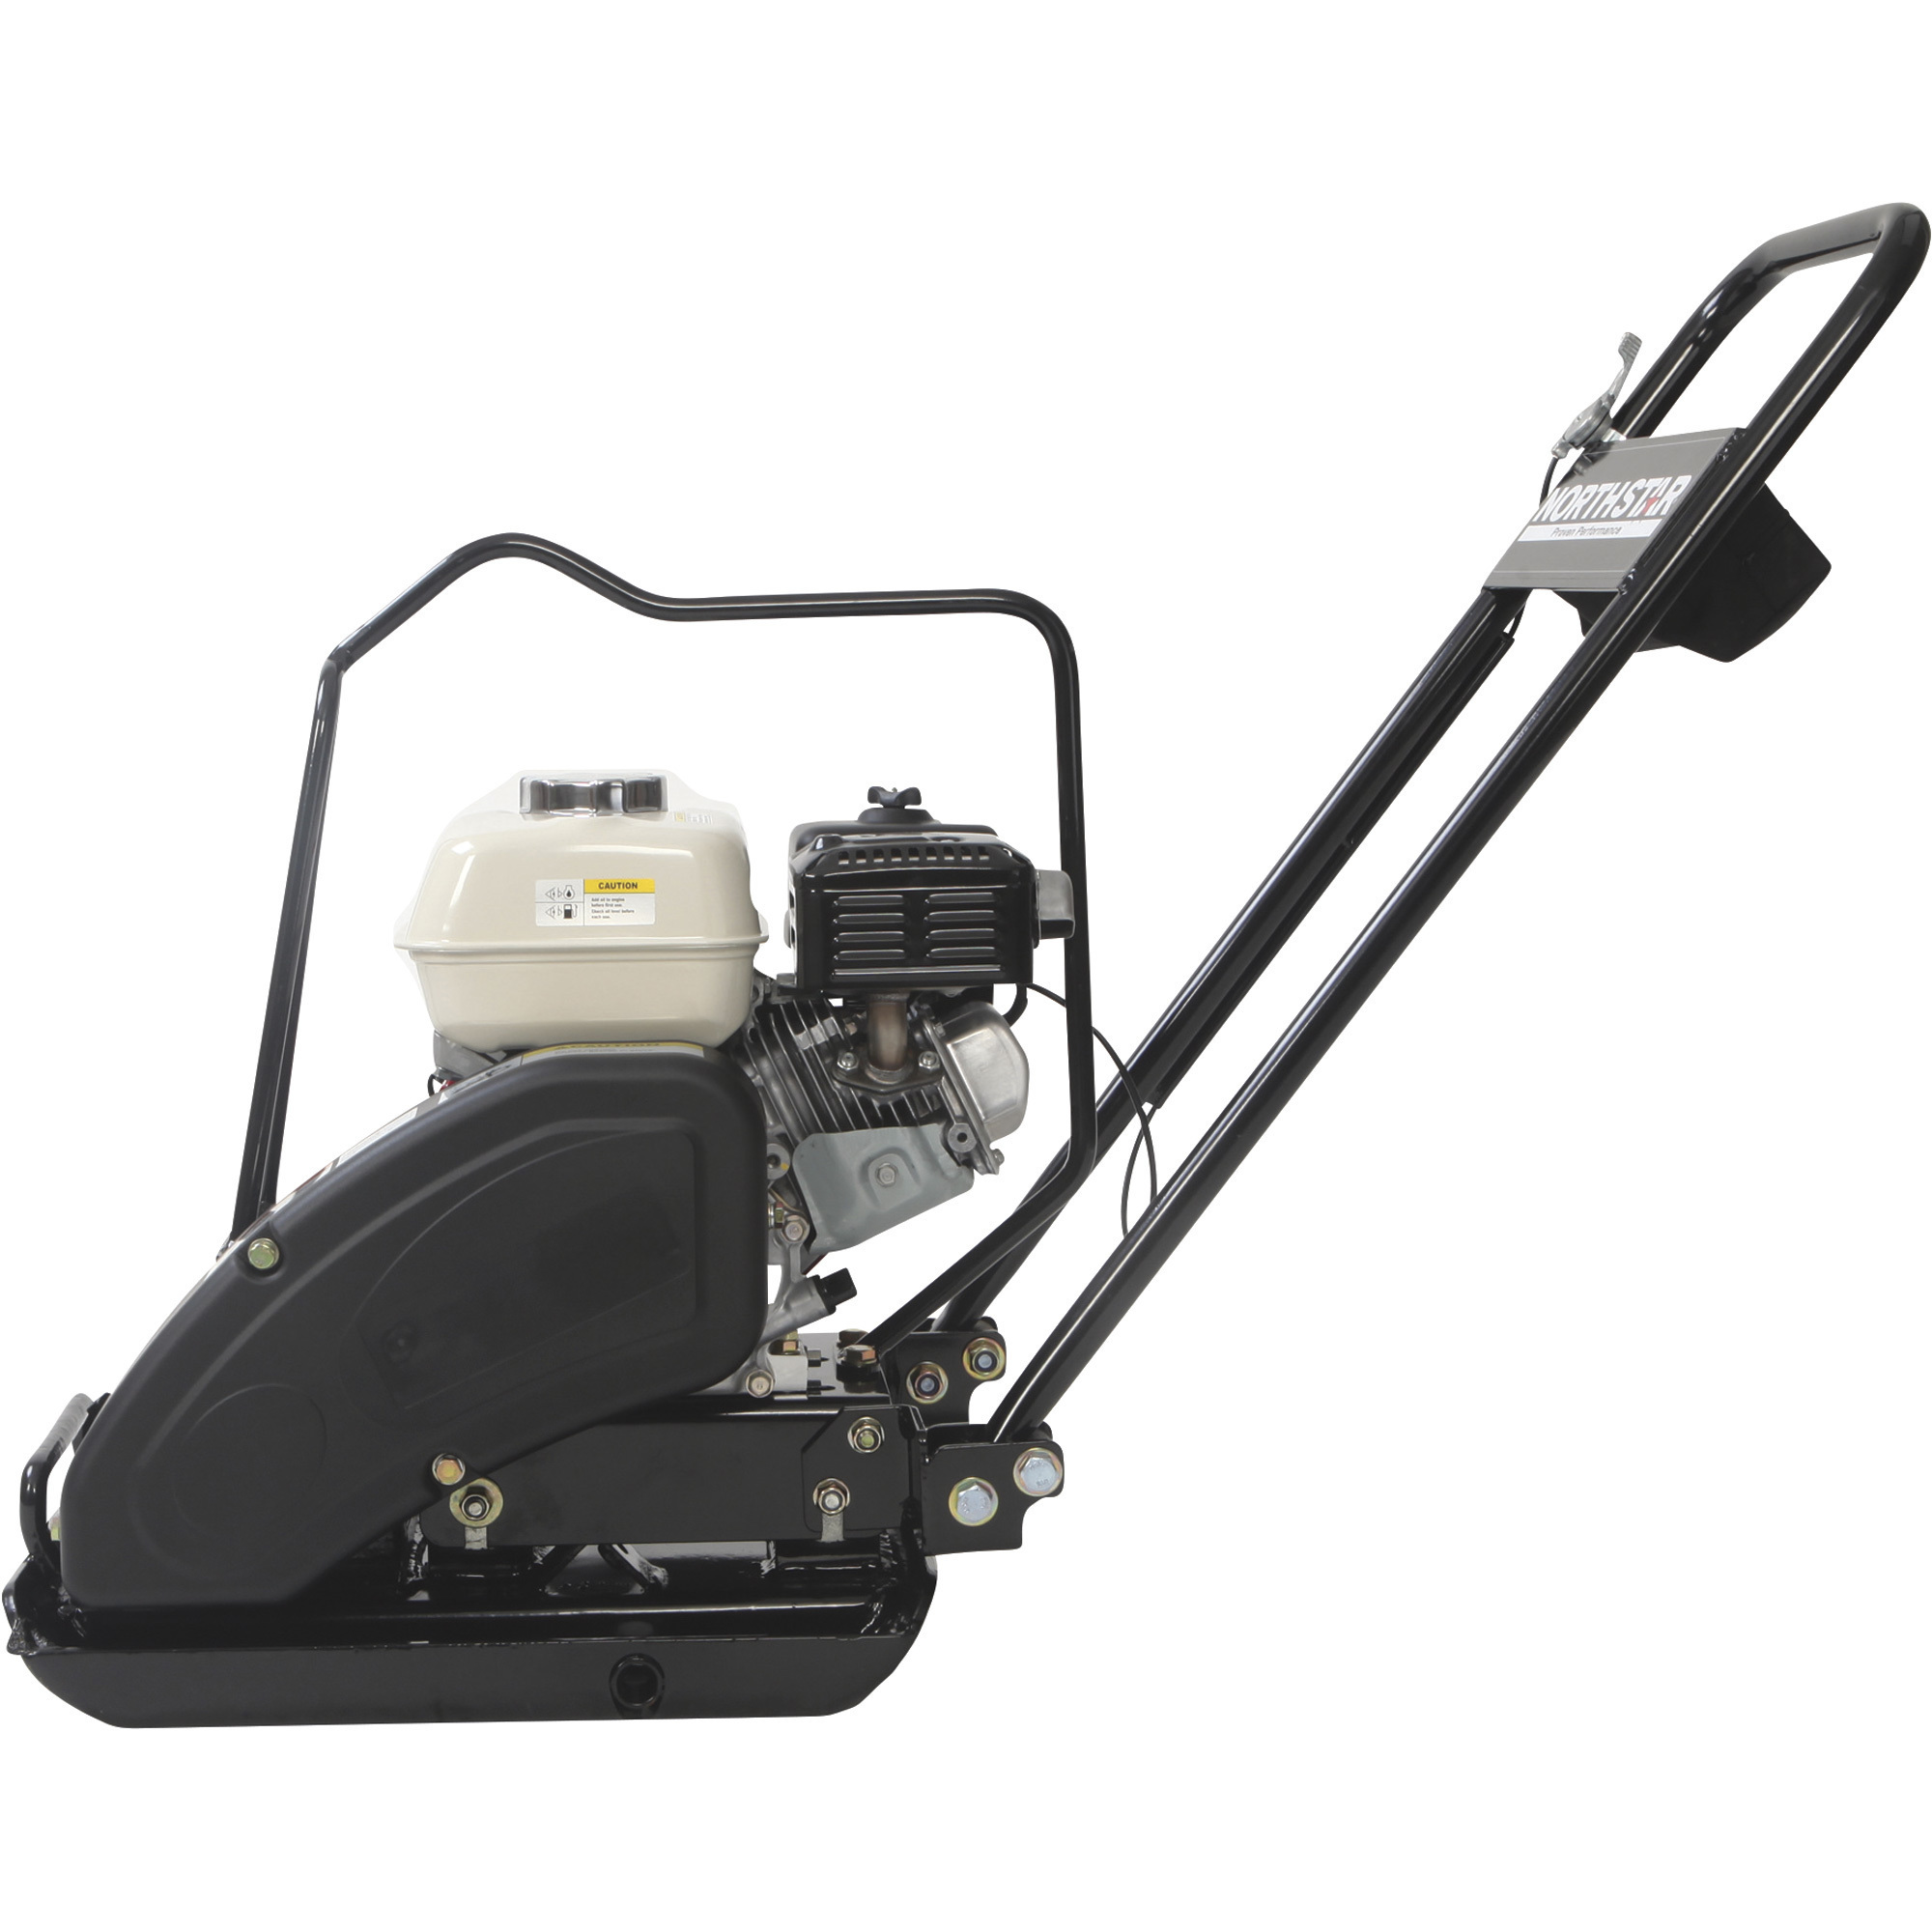 NorthStar Close-Quarters Plate Compactor — with 5.5 HP Honda GX160